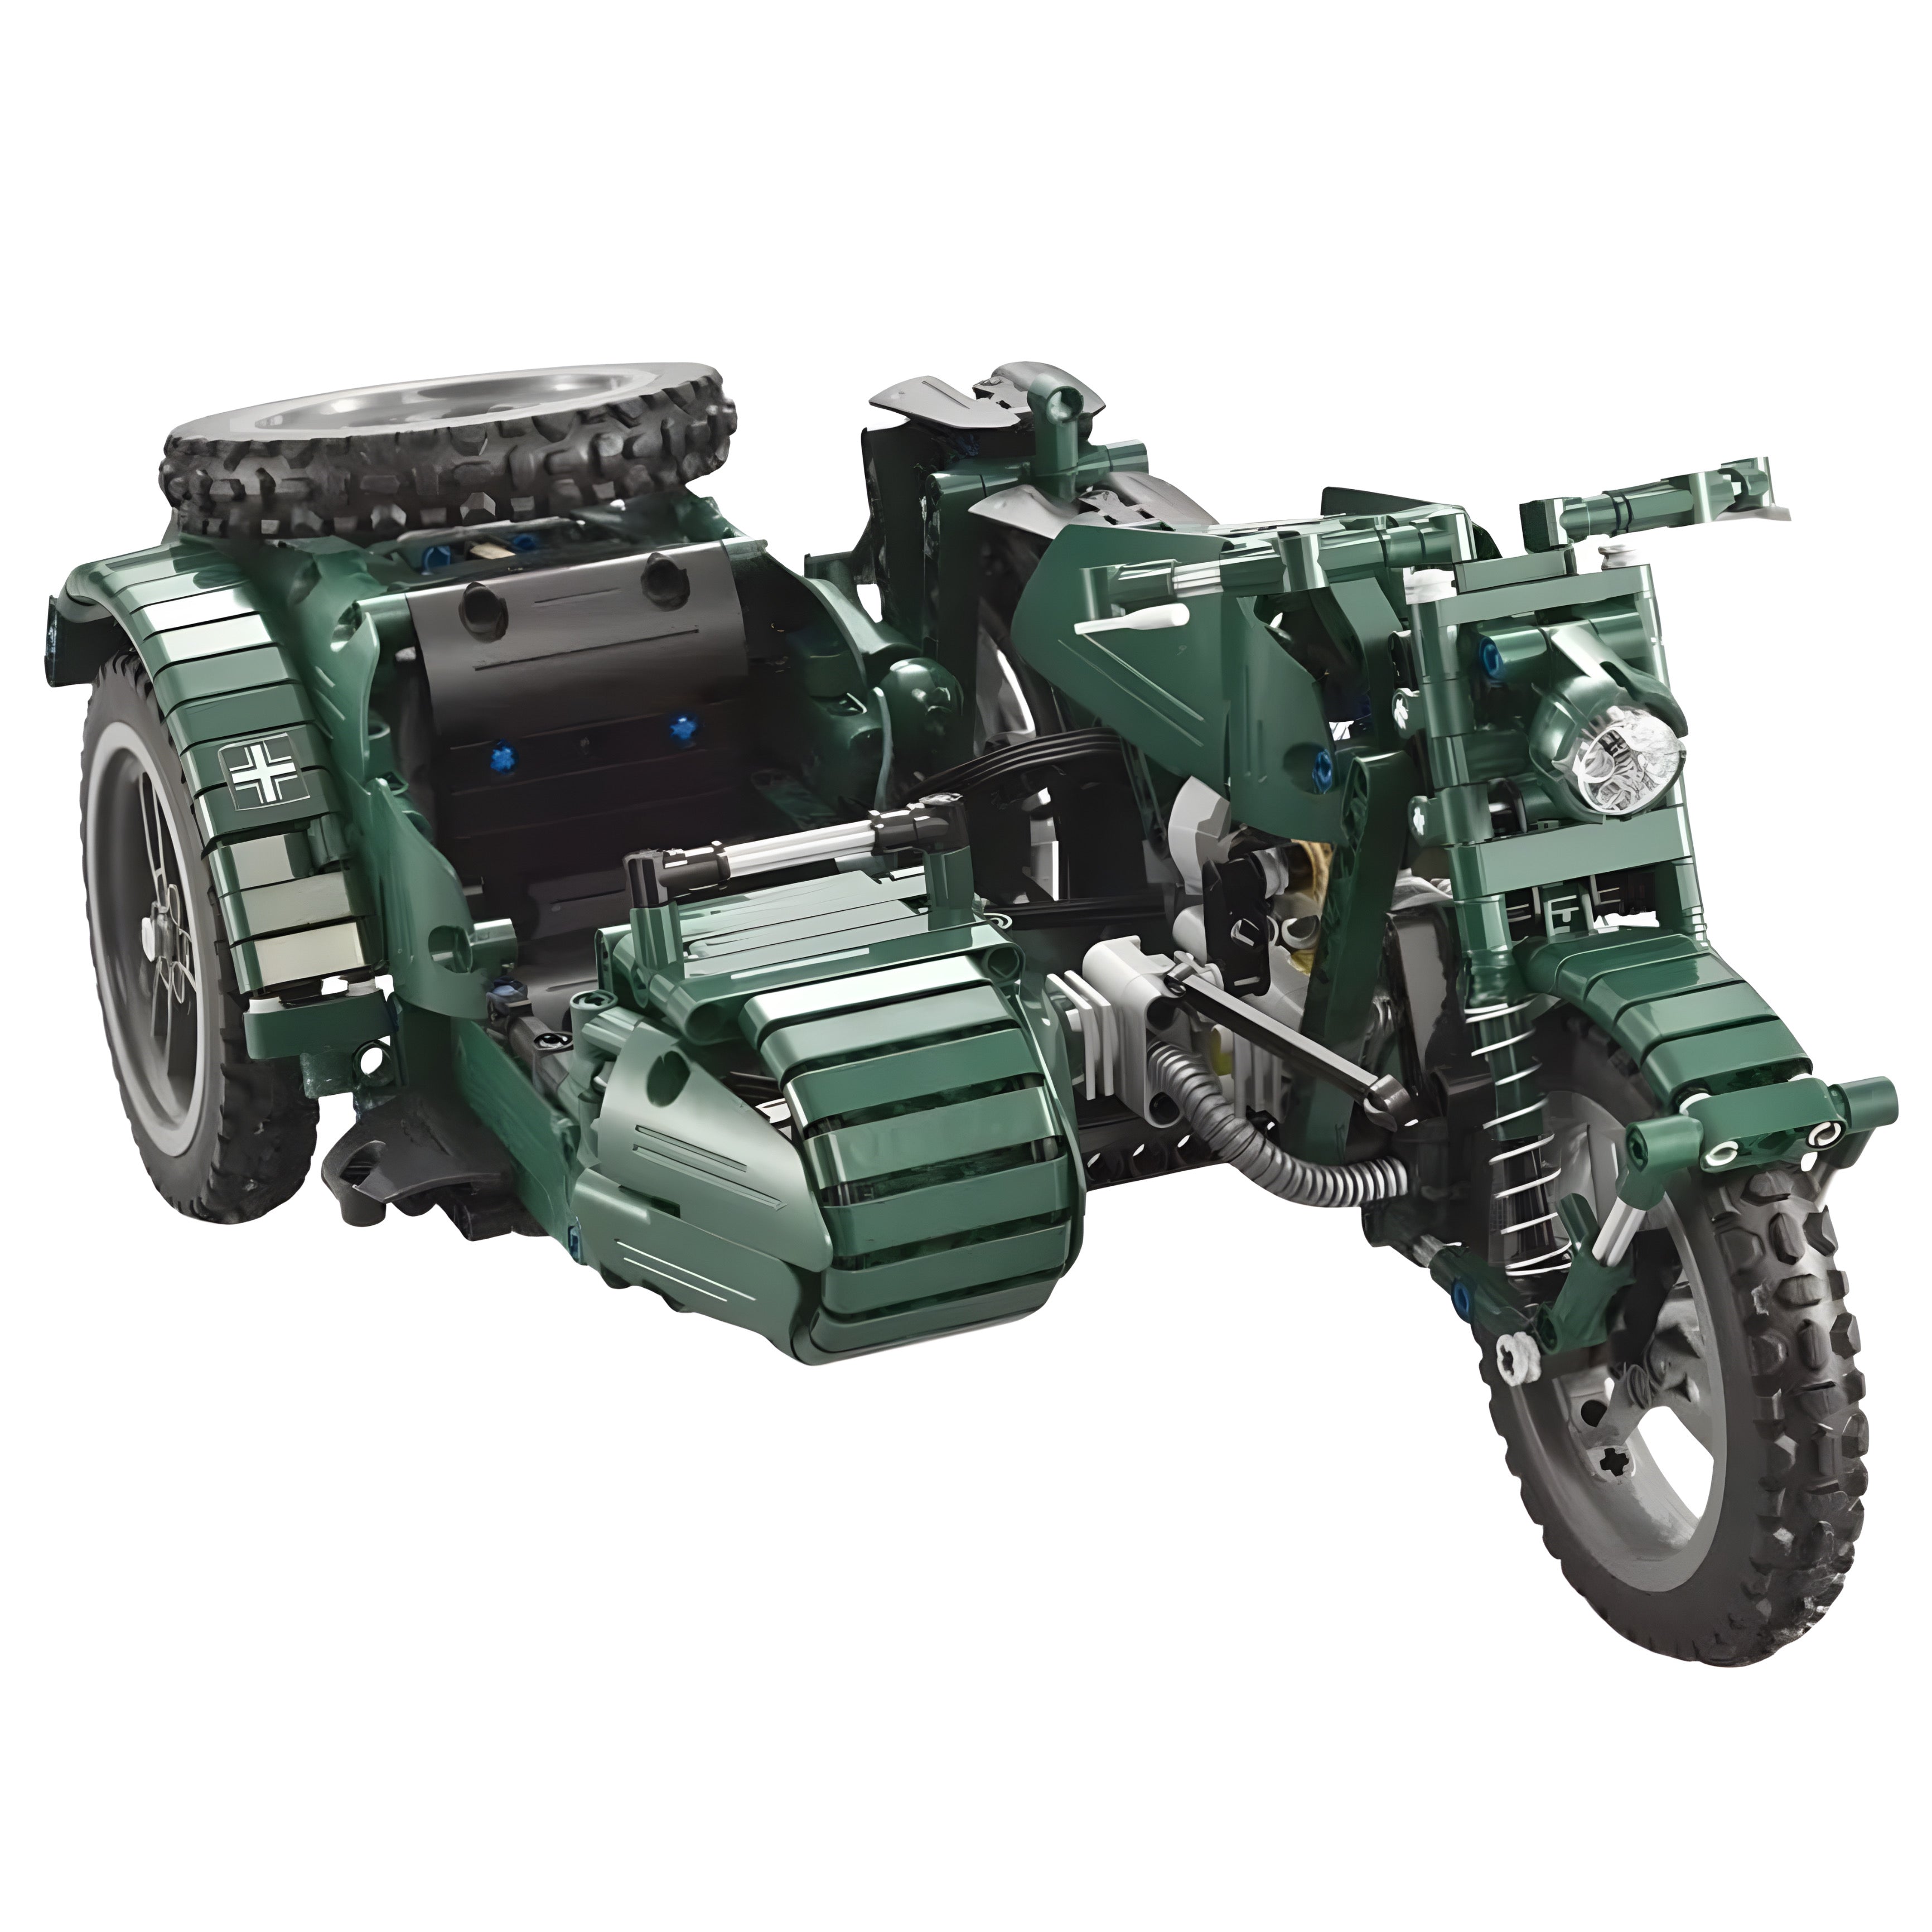 REMOTE CONTROLLED SIDECAR MOTORCYCLE | 629PCS